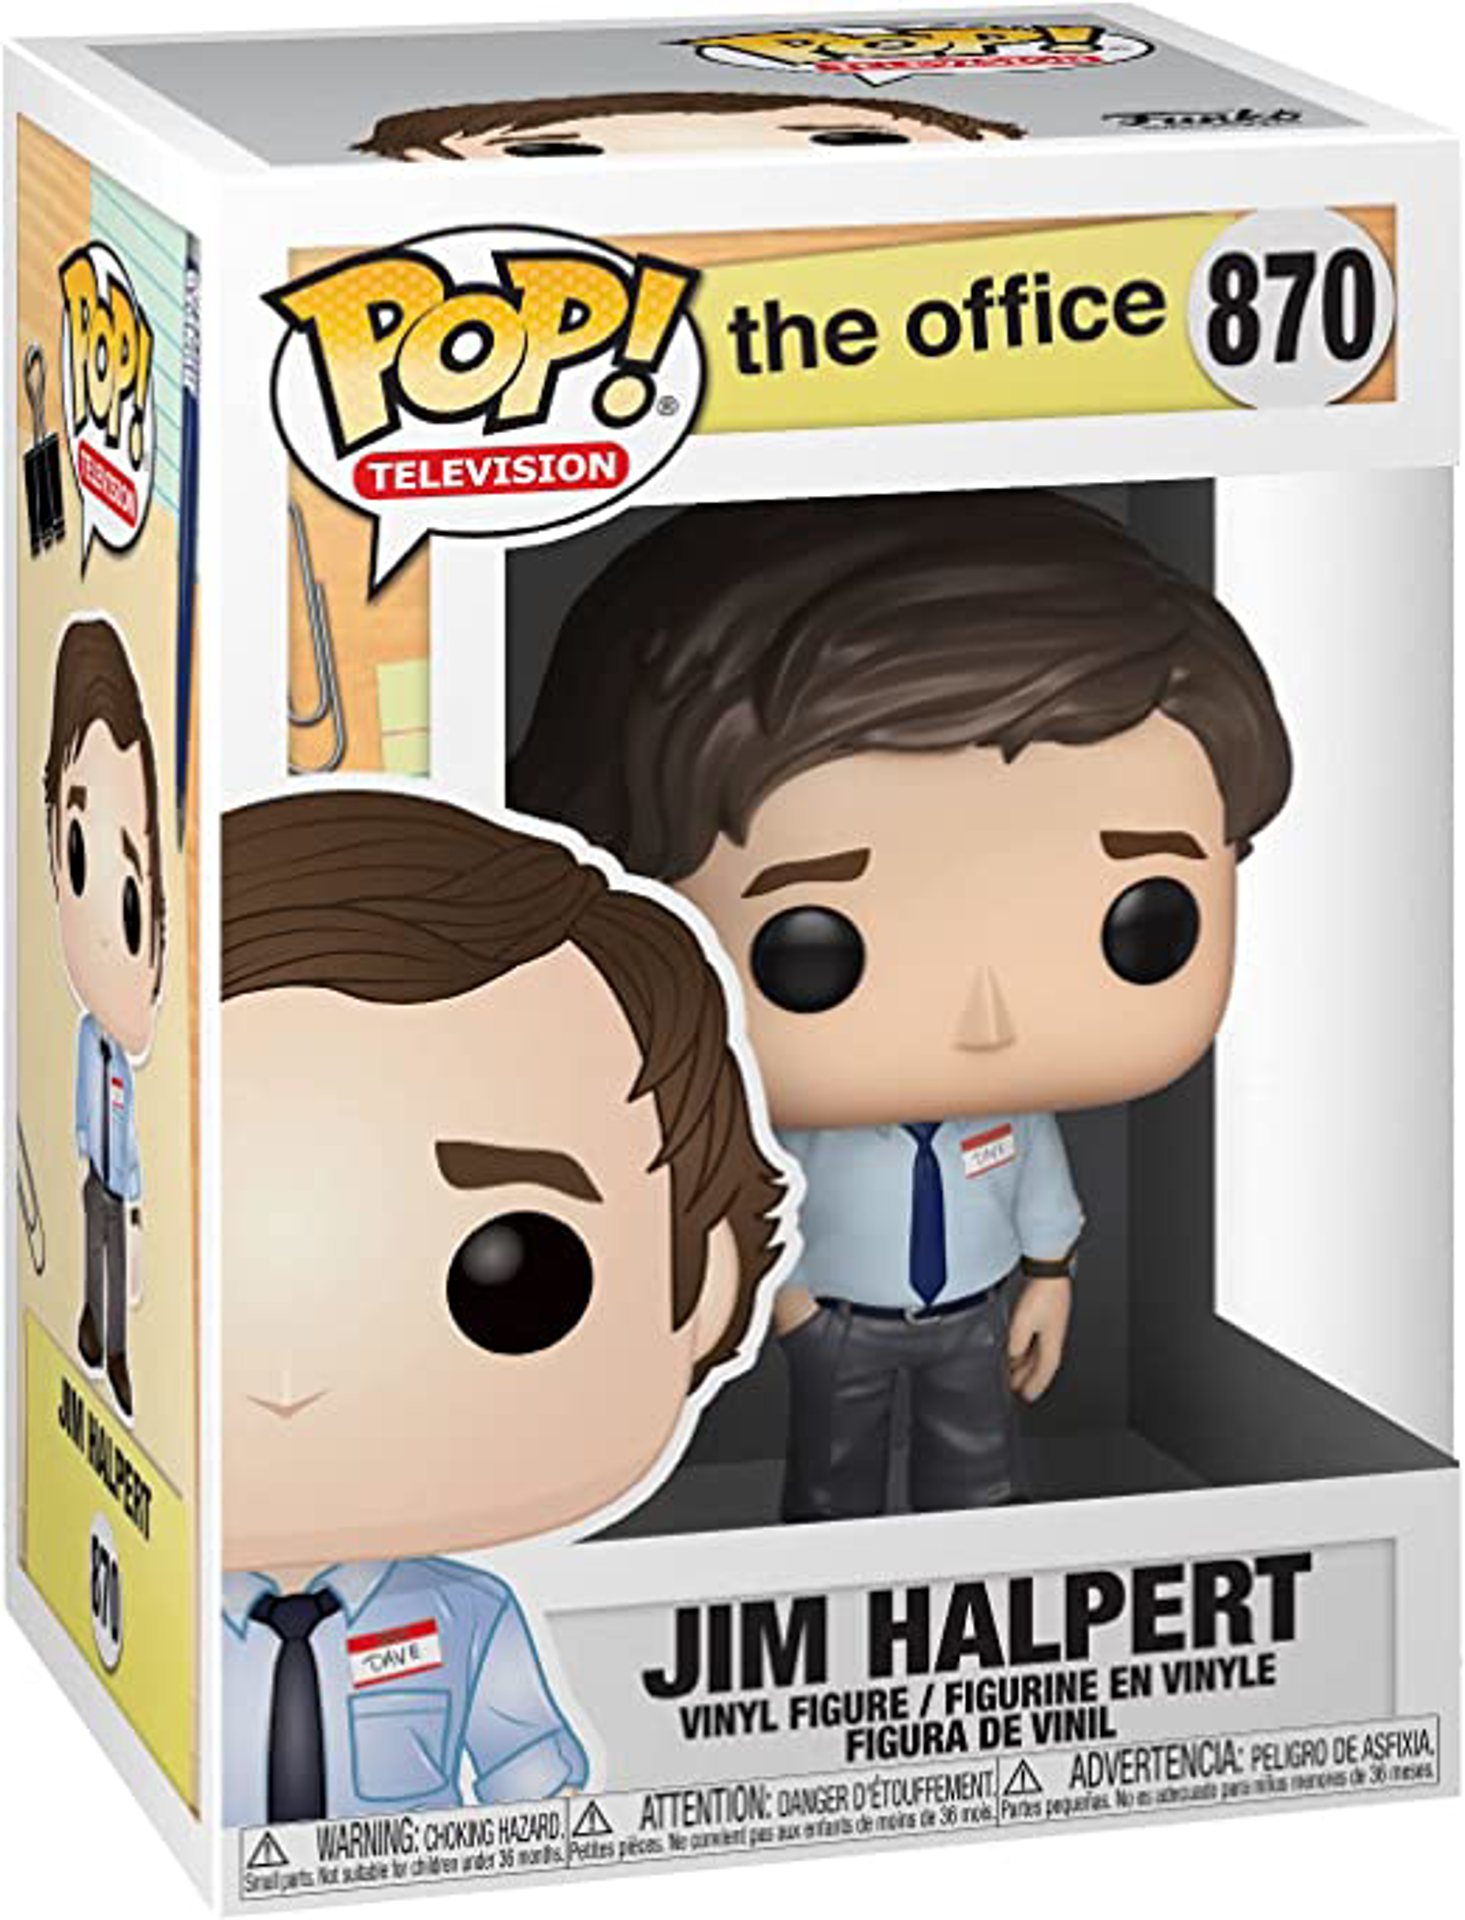 Funko Pop! TV: The Office - Jim Halpert (Chance of Special Chase Edition)